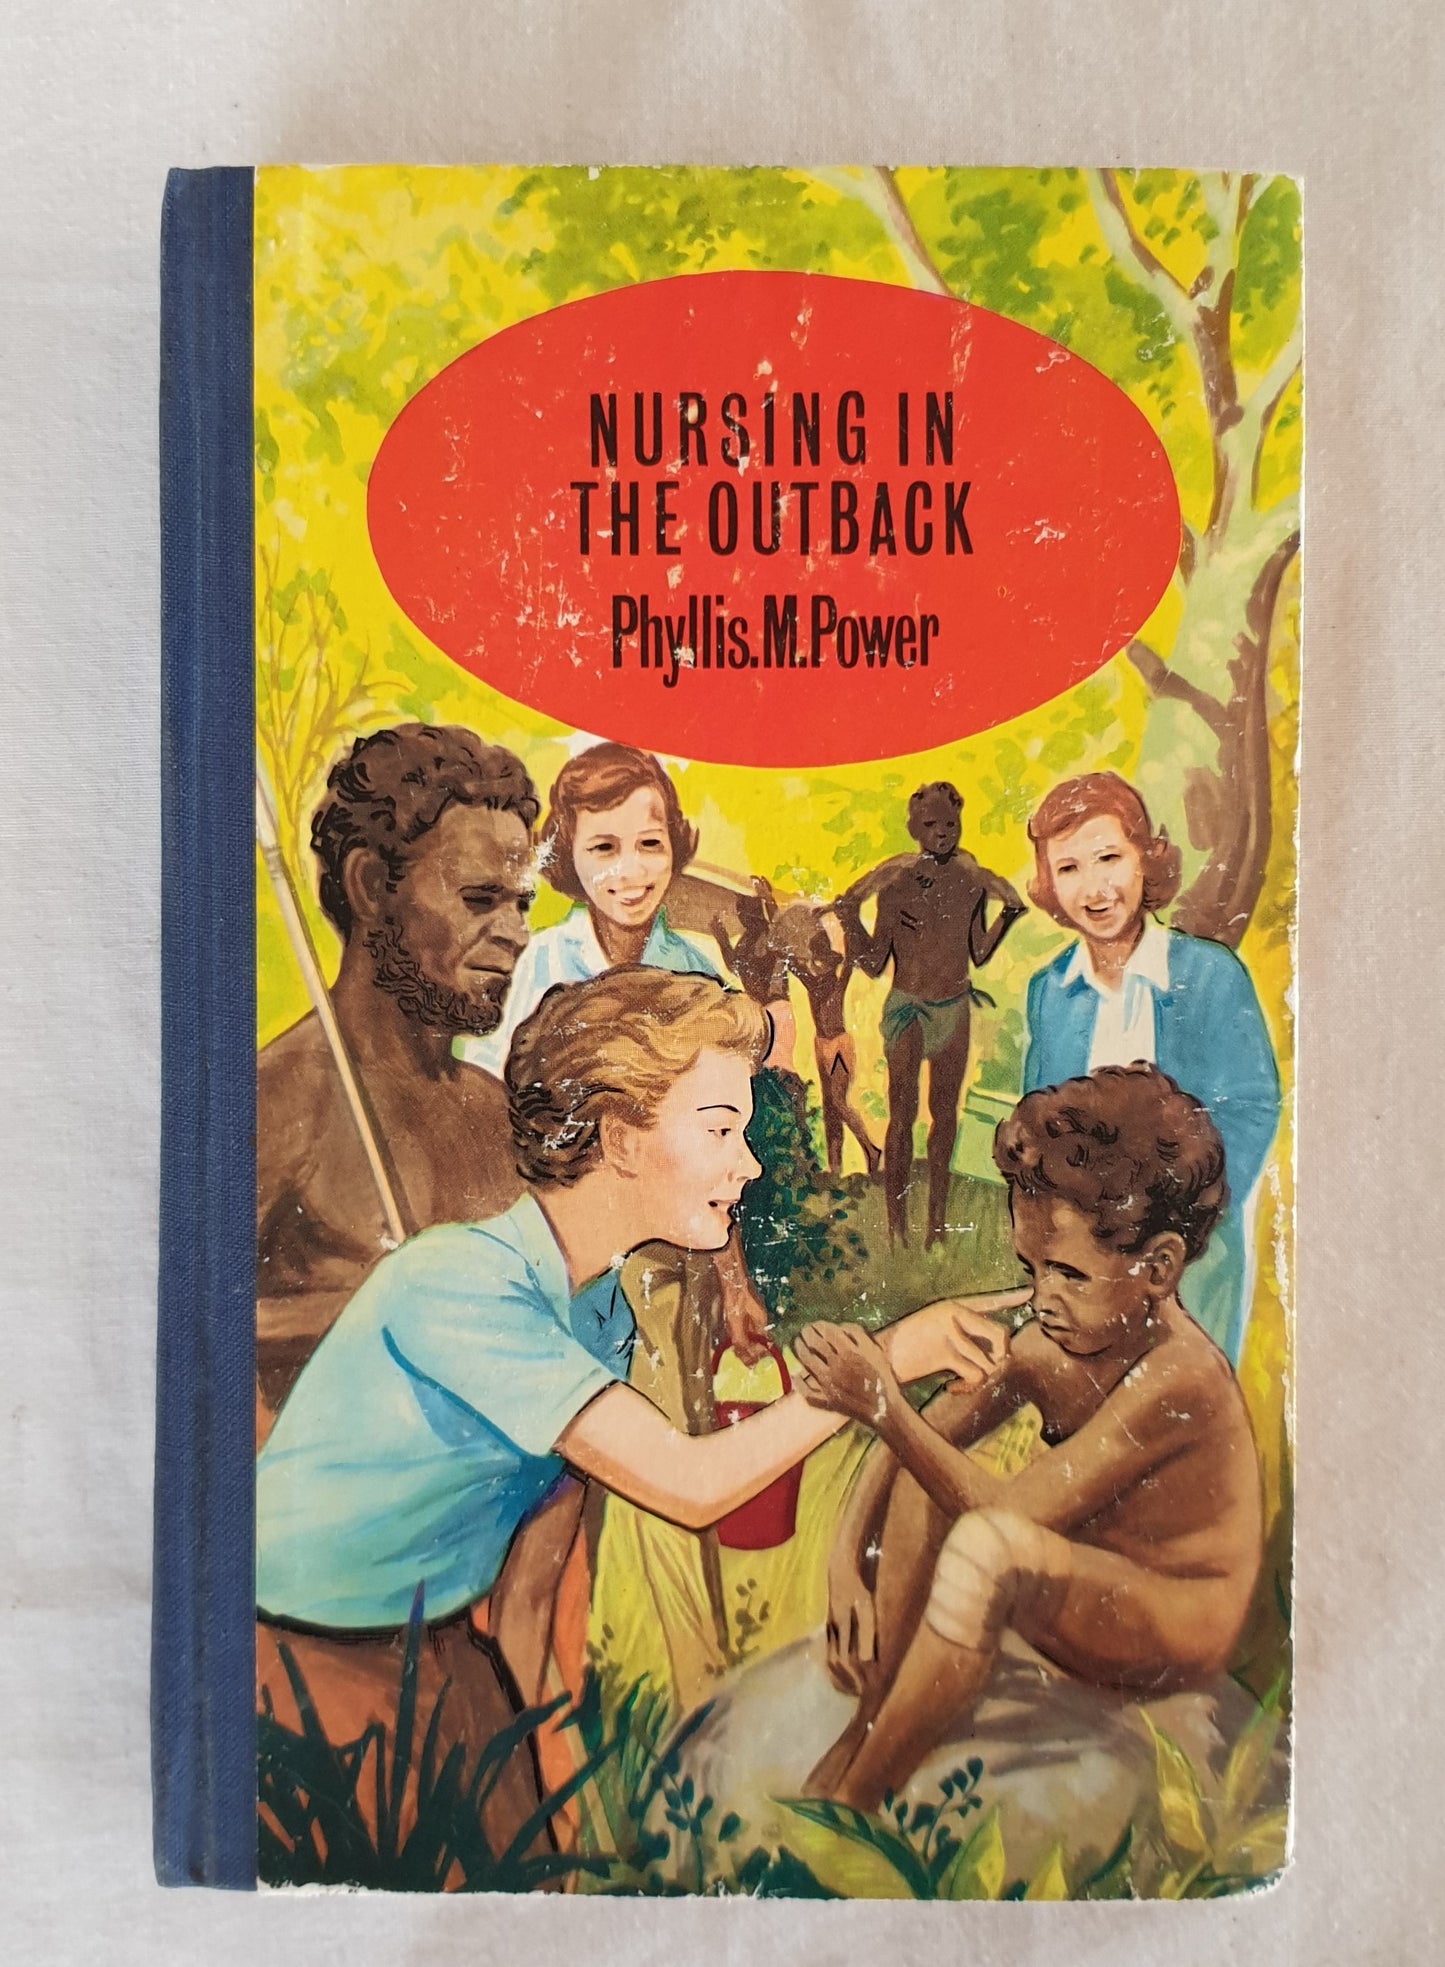 Nursing In The Outback by Phyllis. M. Power